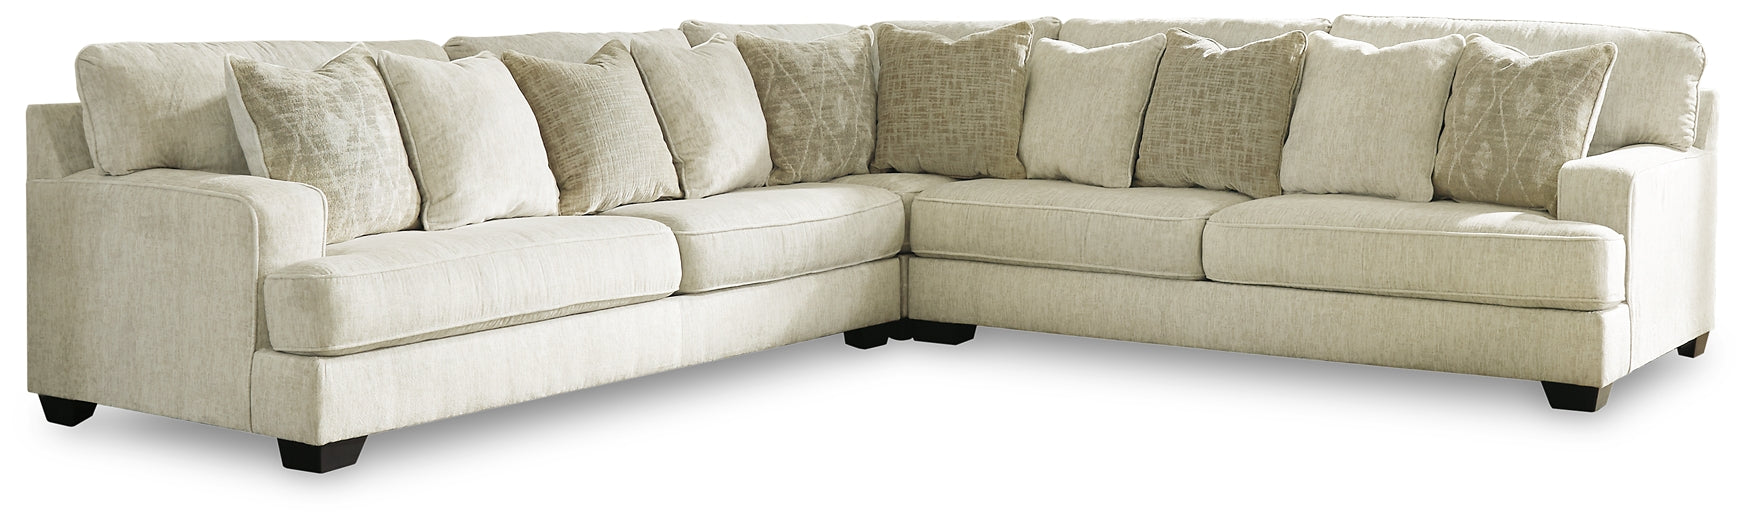 Rawcliffe 3-Piece Sectional with Ottoman JR Furniture Storefurniture, home furniture, home decor